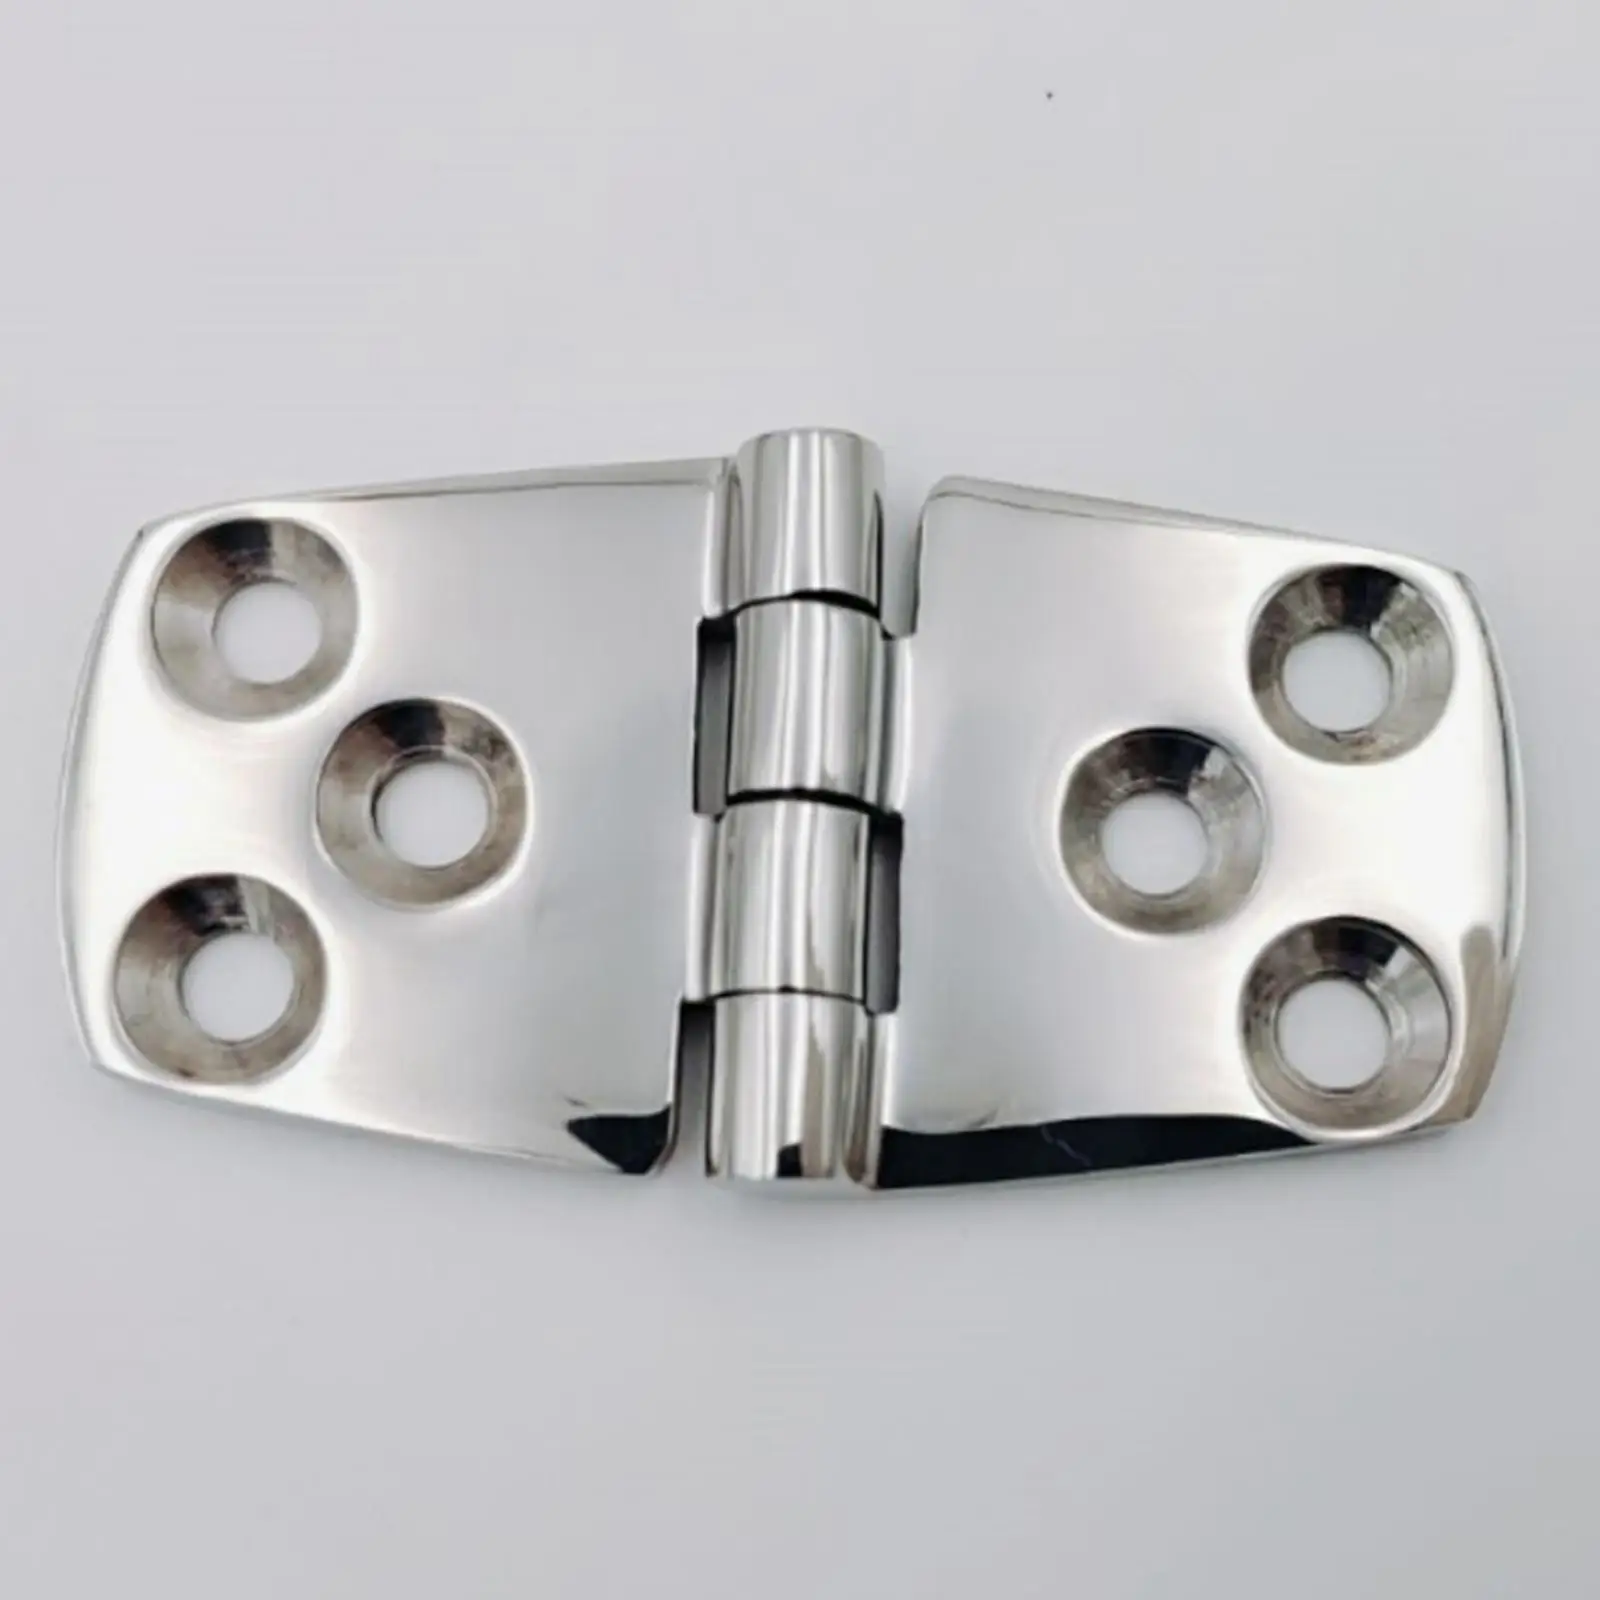 Boat Hinge Cast Solid Accessory 6 Holes Mirror Polished Stainless Steel Hatch Hinge for Cabinet Folding Door Boat Window RV